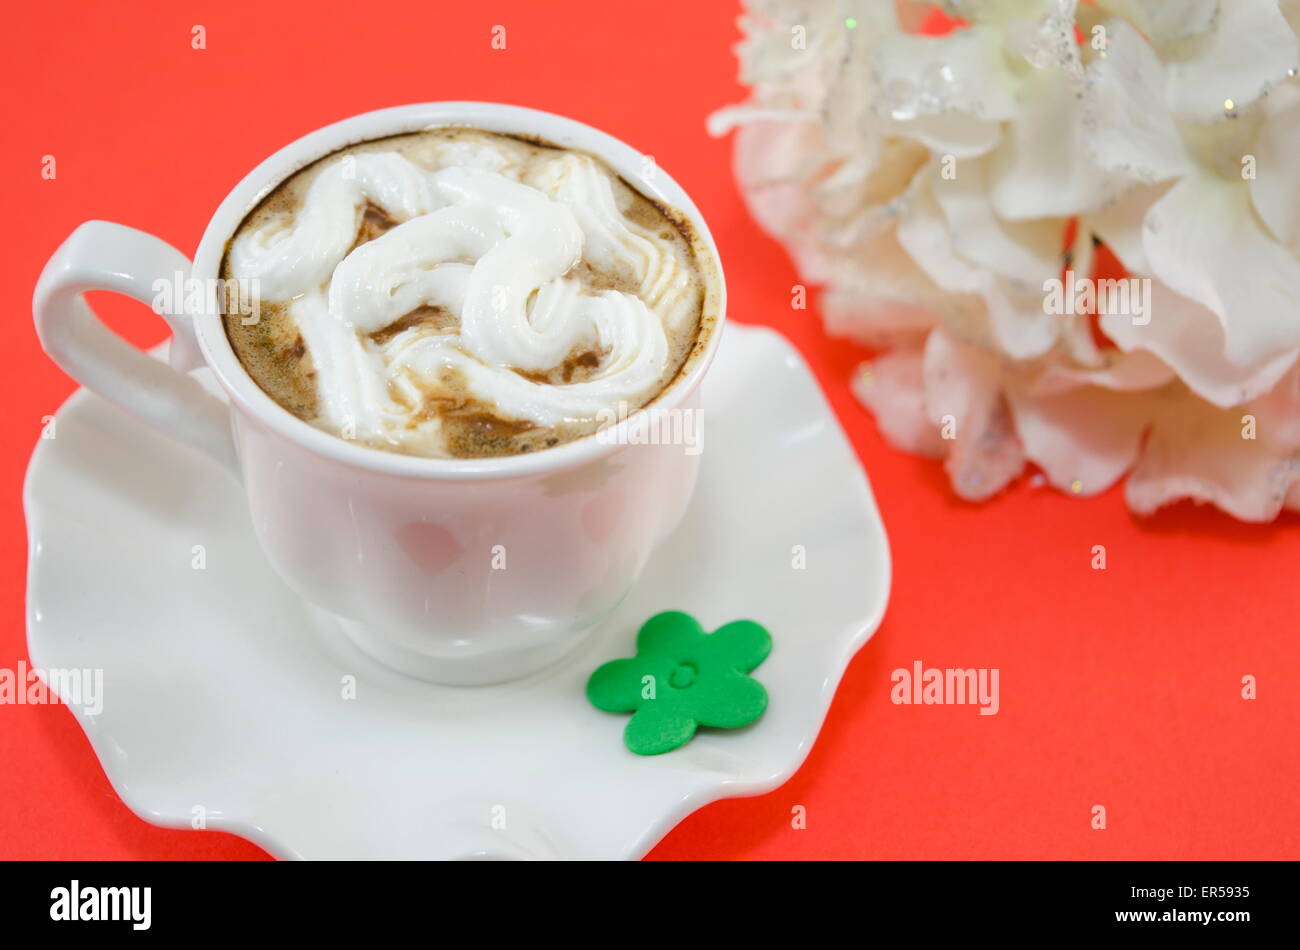 Cup of coffee with whipped cream on a red table Stock Photo